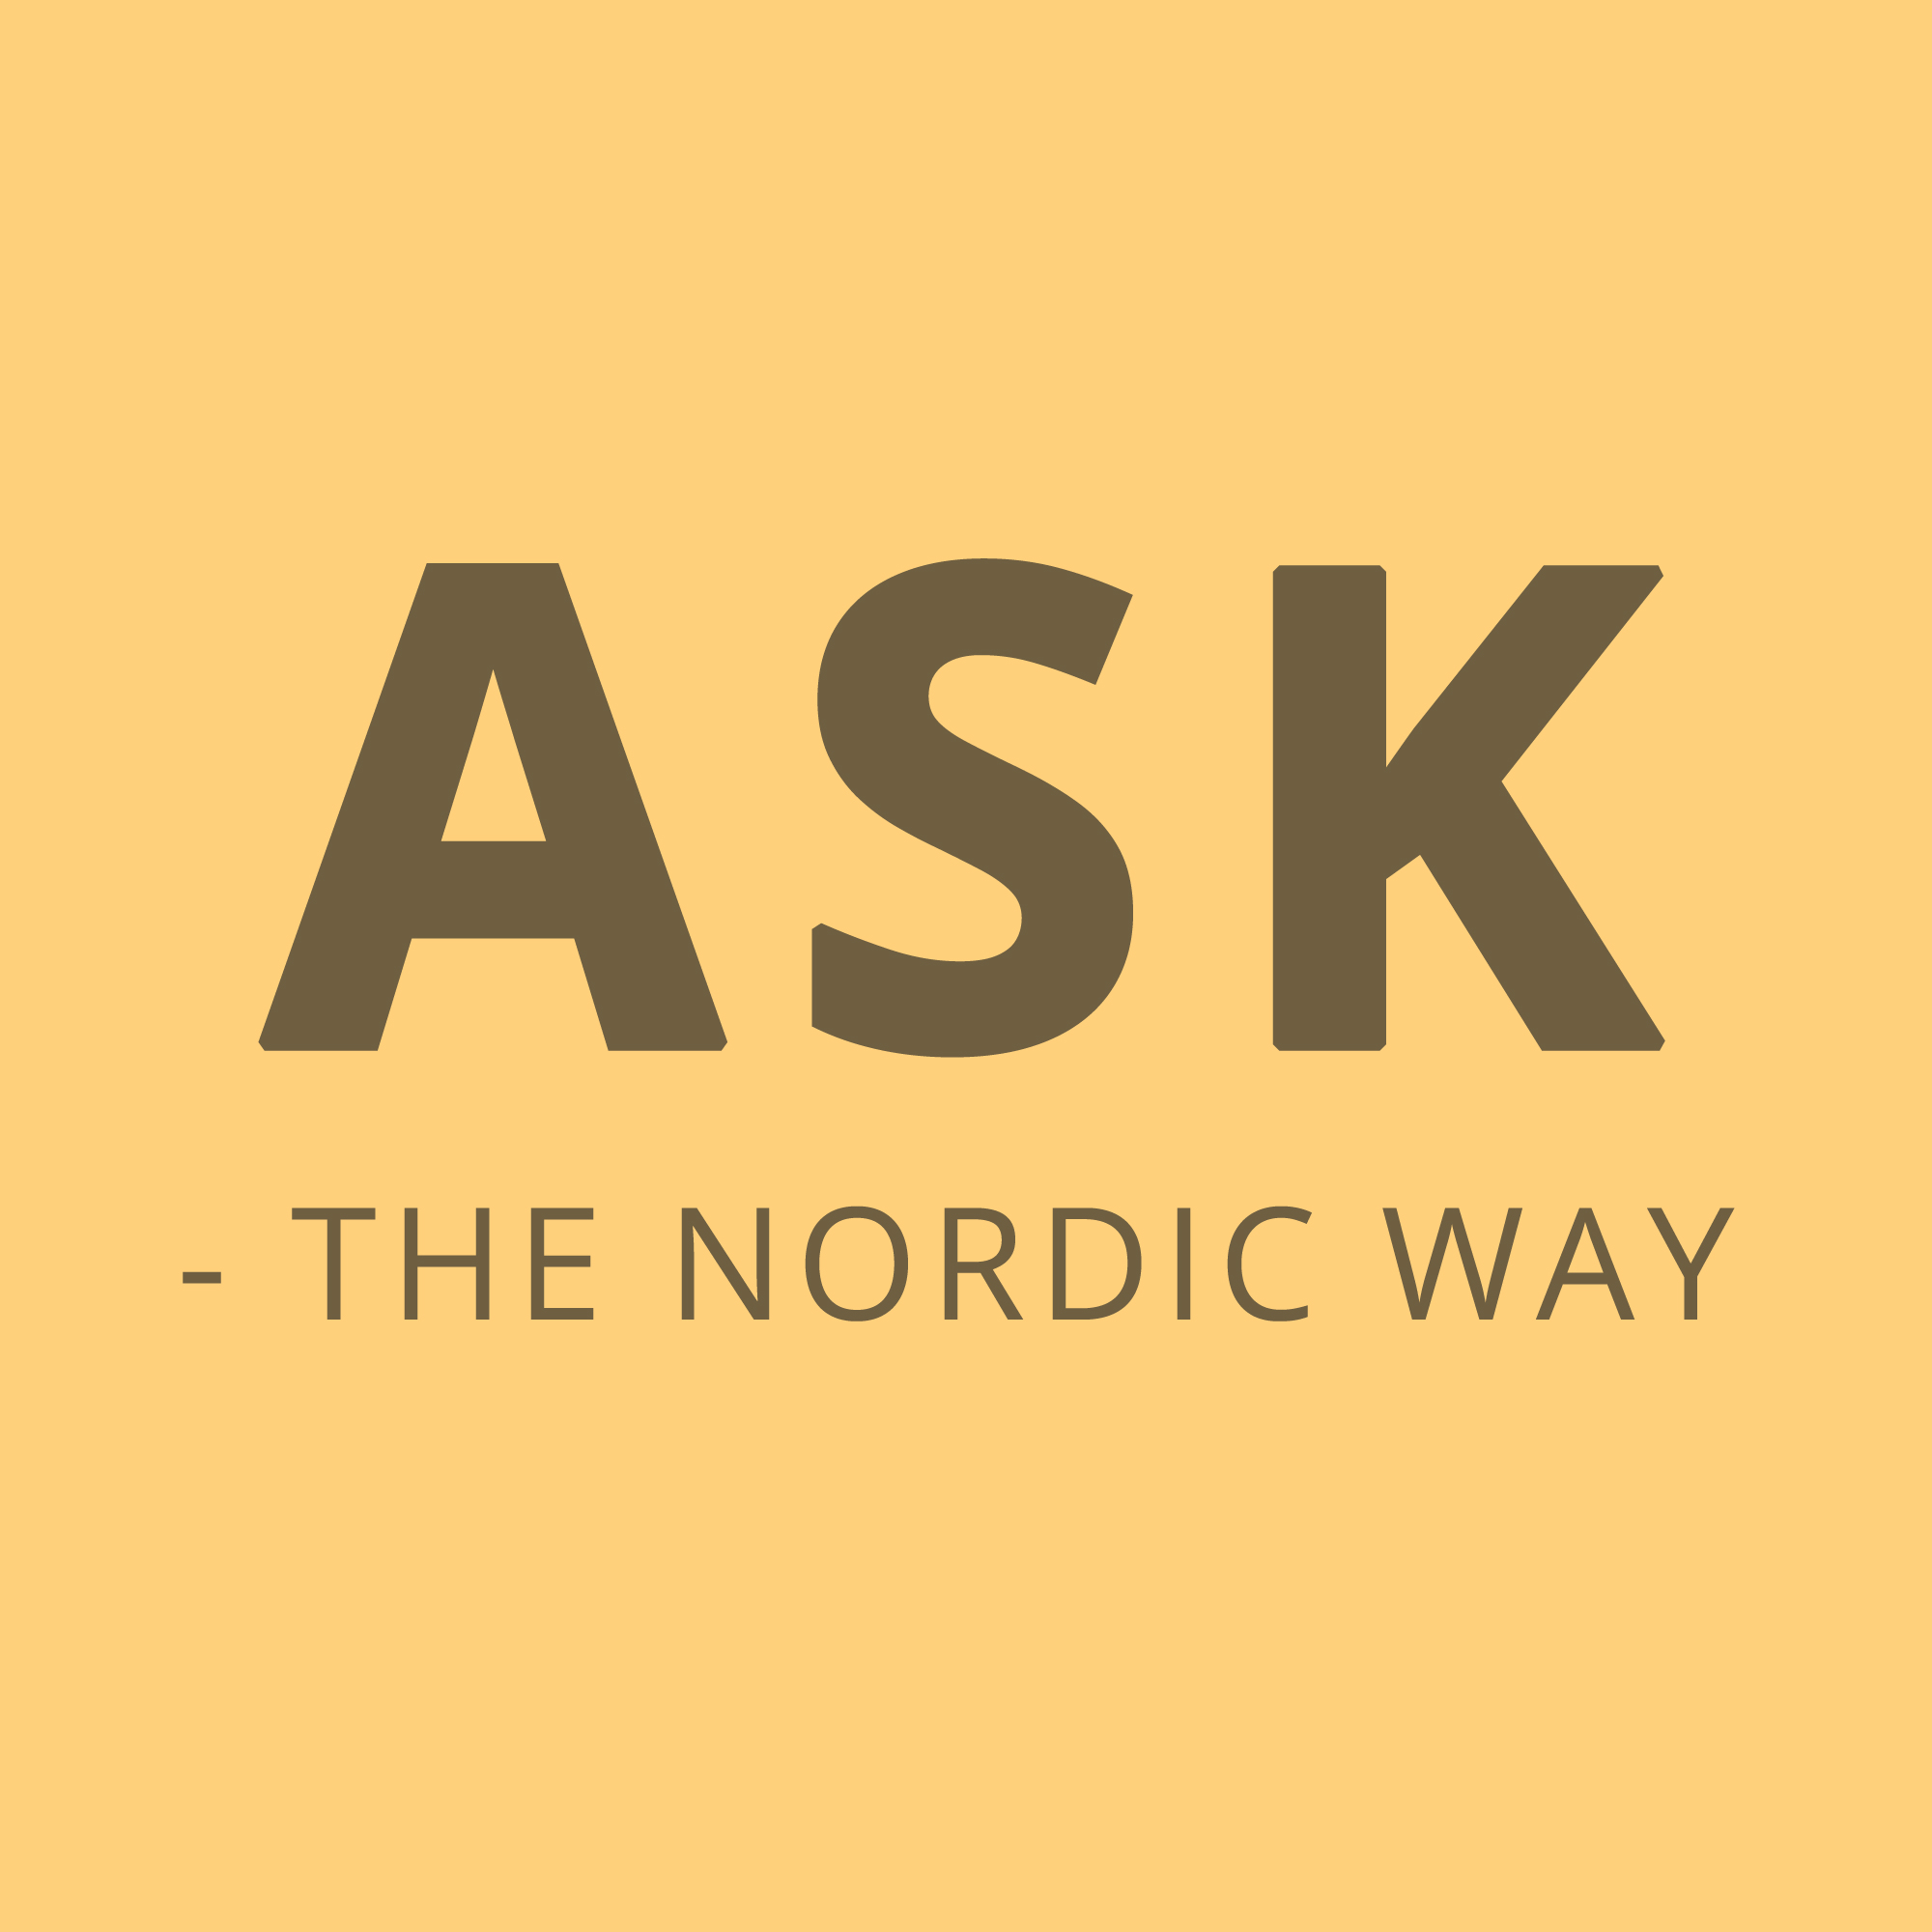 ASK the nordic way